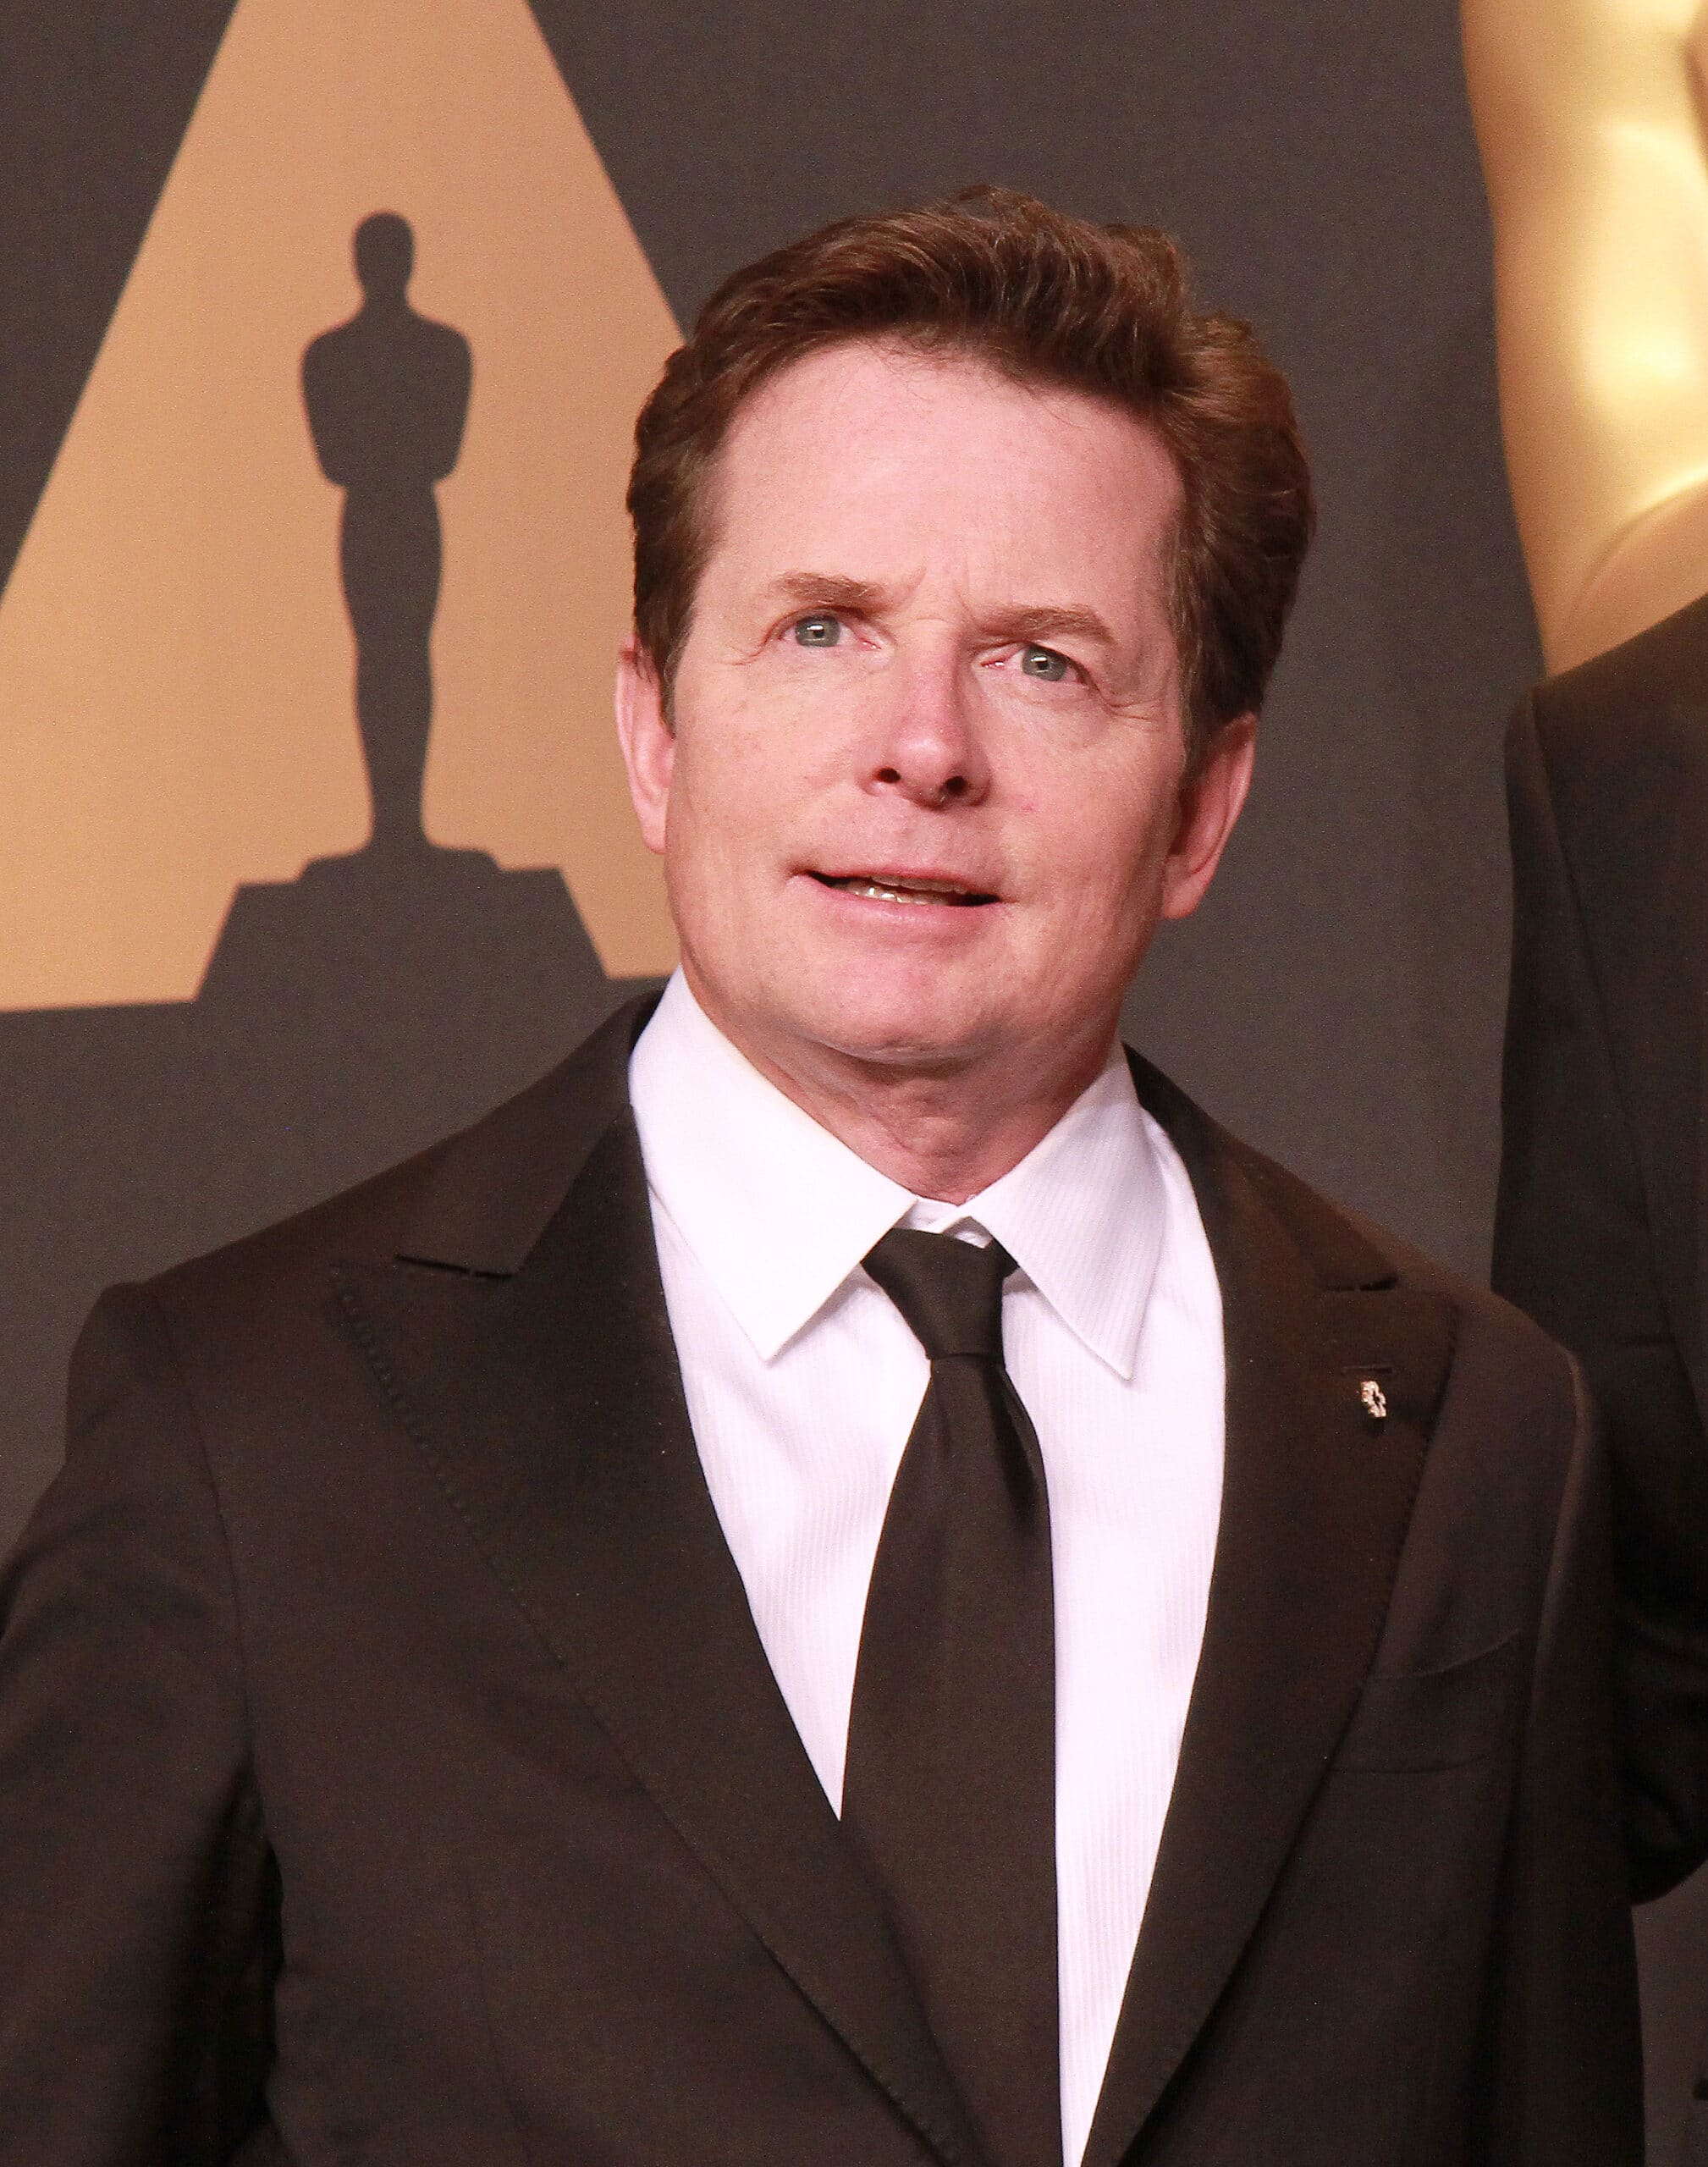 Michael J. Fox Talks About His Toughest Times With ...